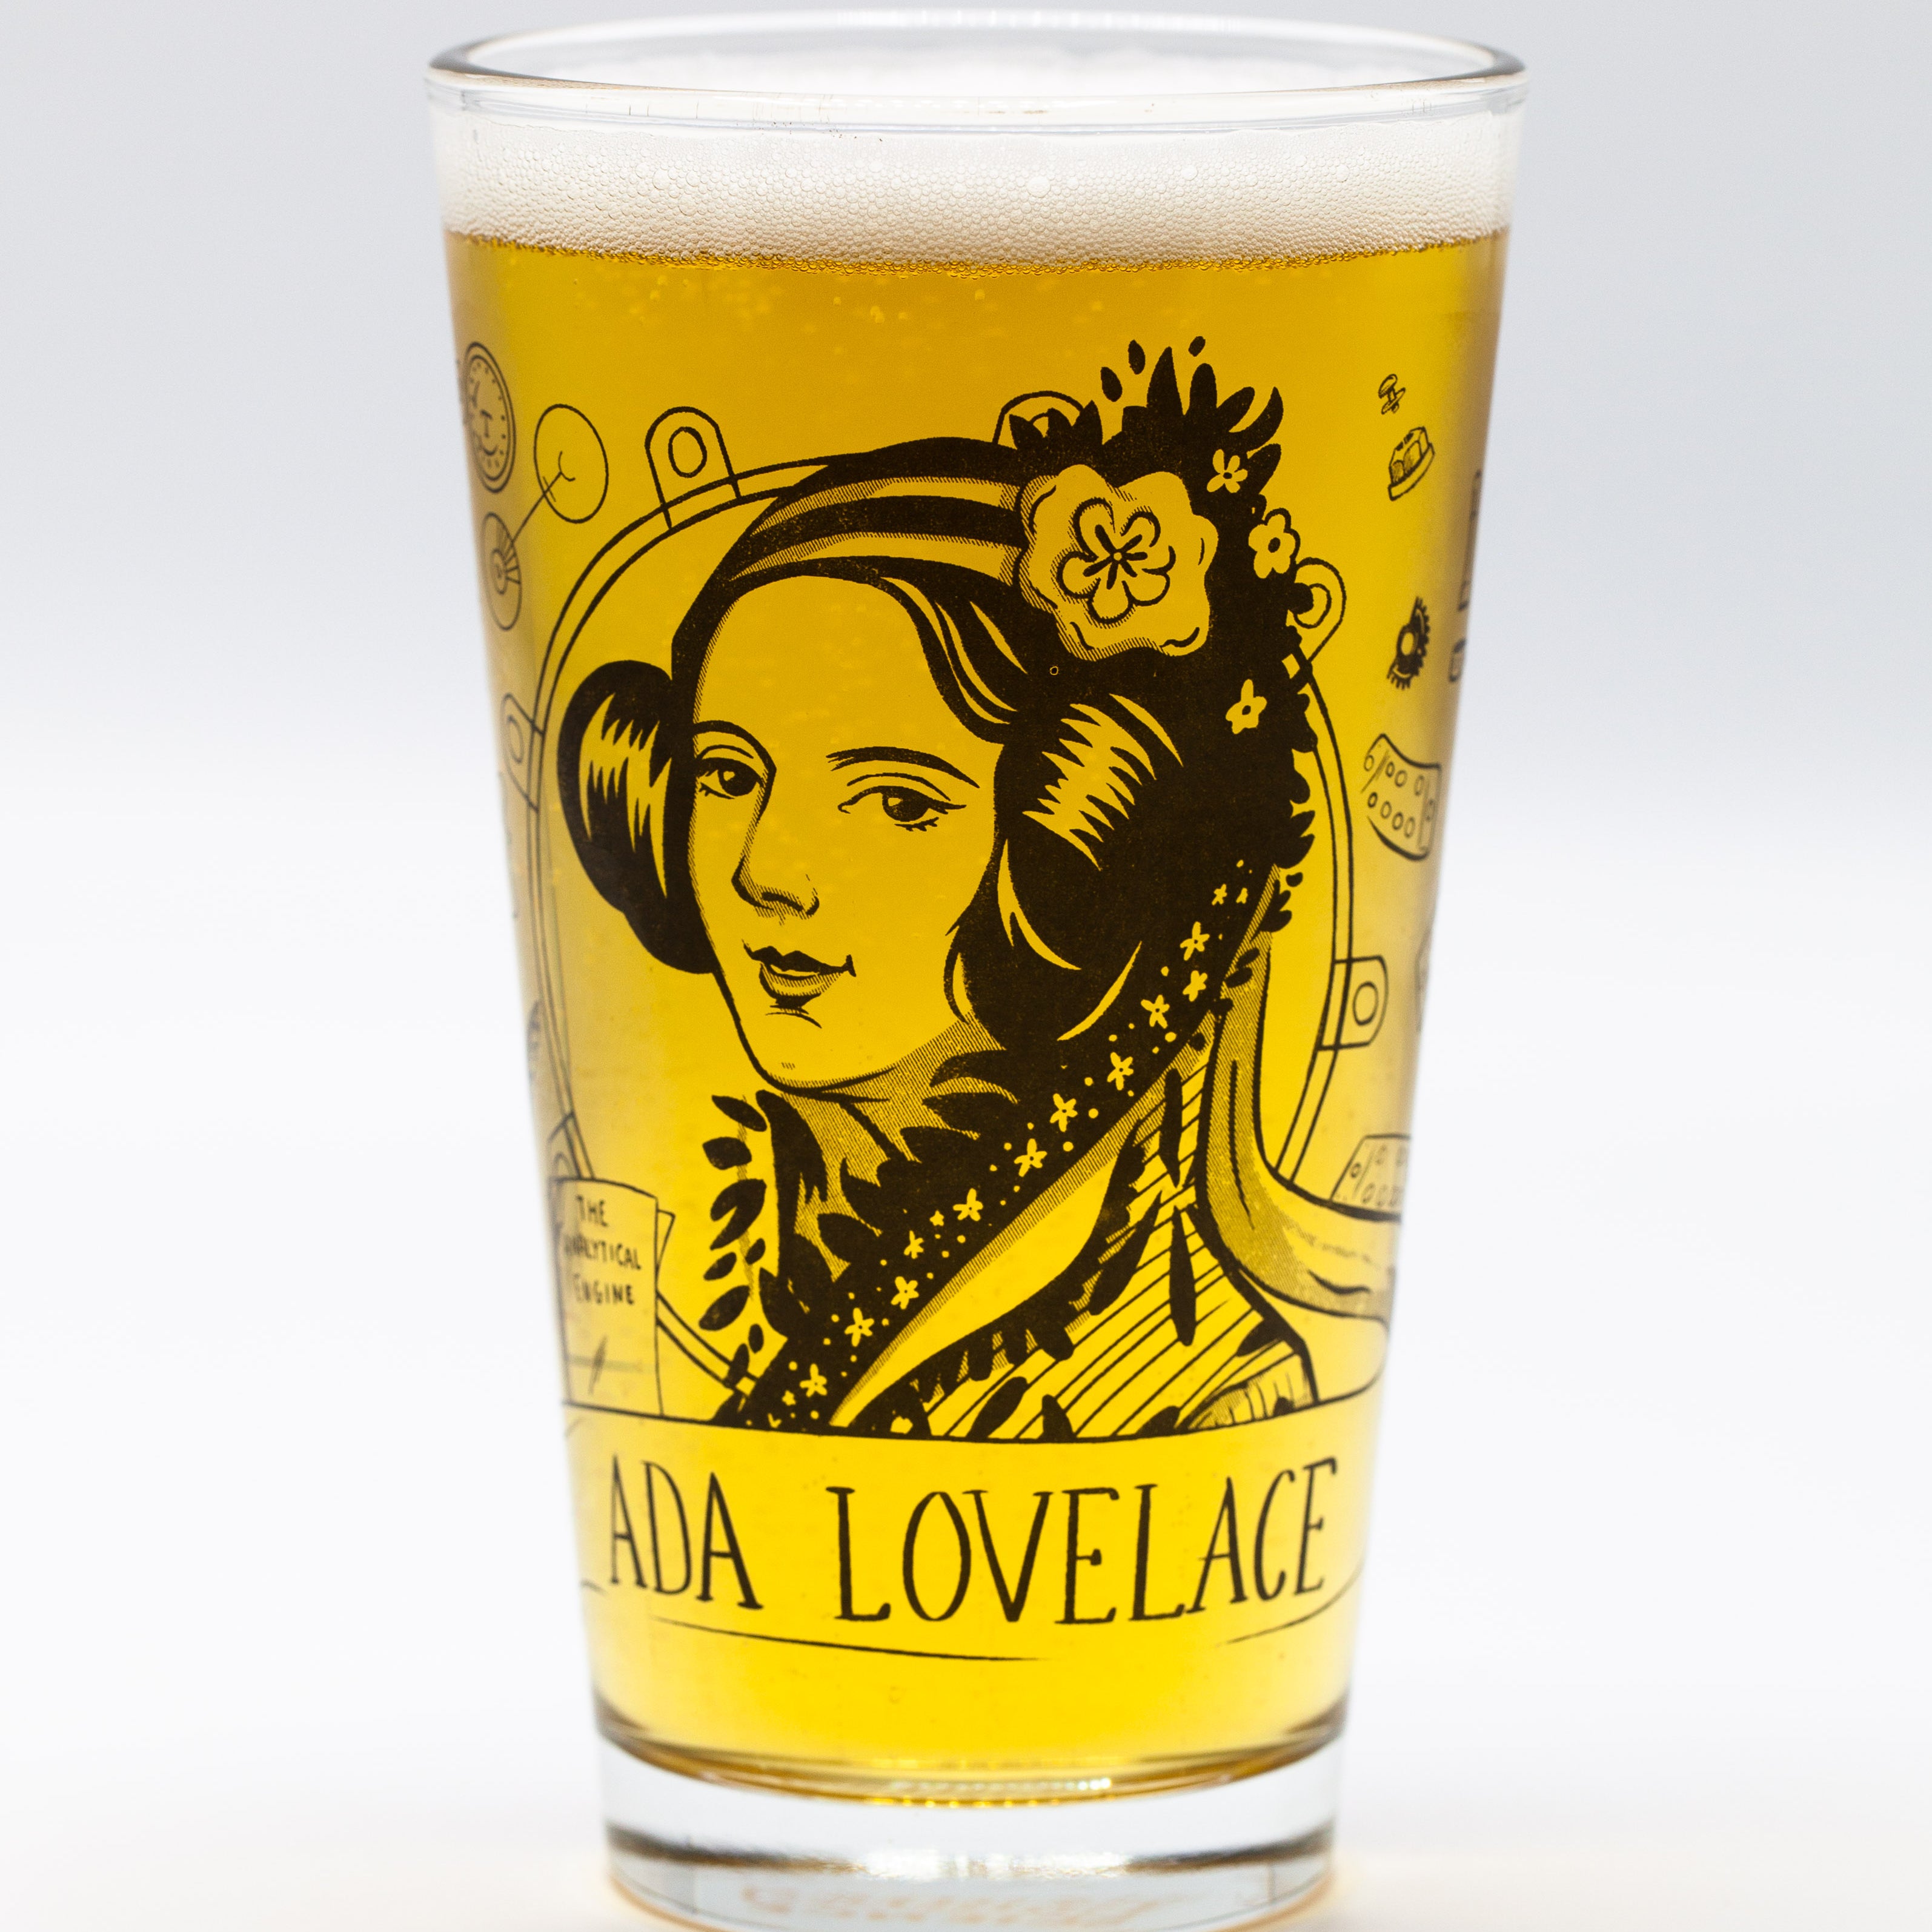 Ada Lovelace pint glass by Cognitive Surplus, beer pint glass